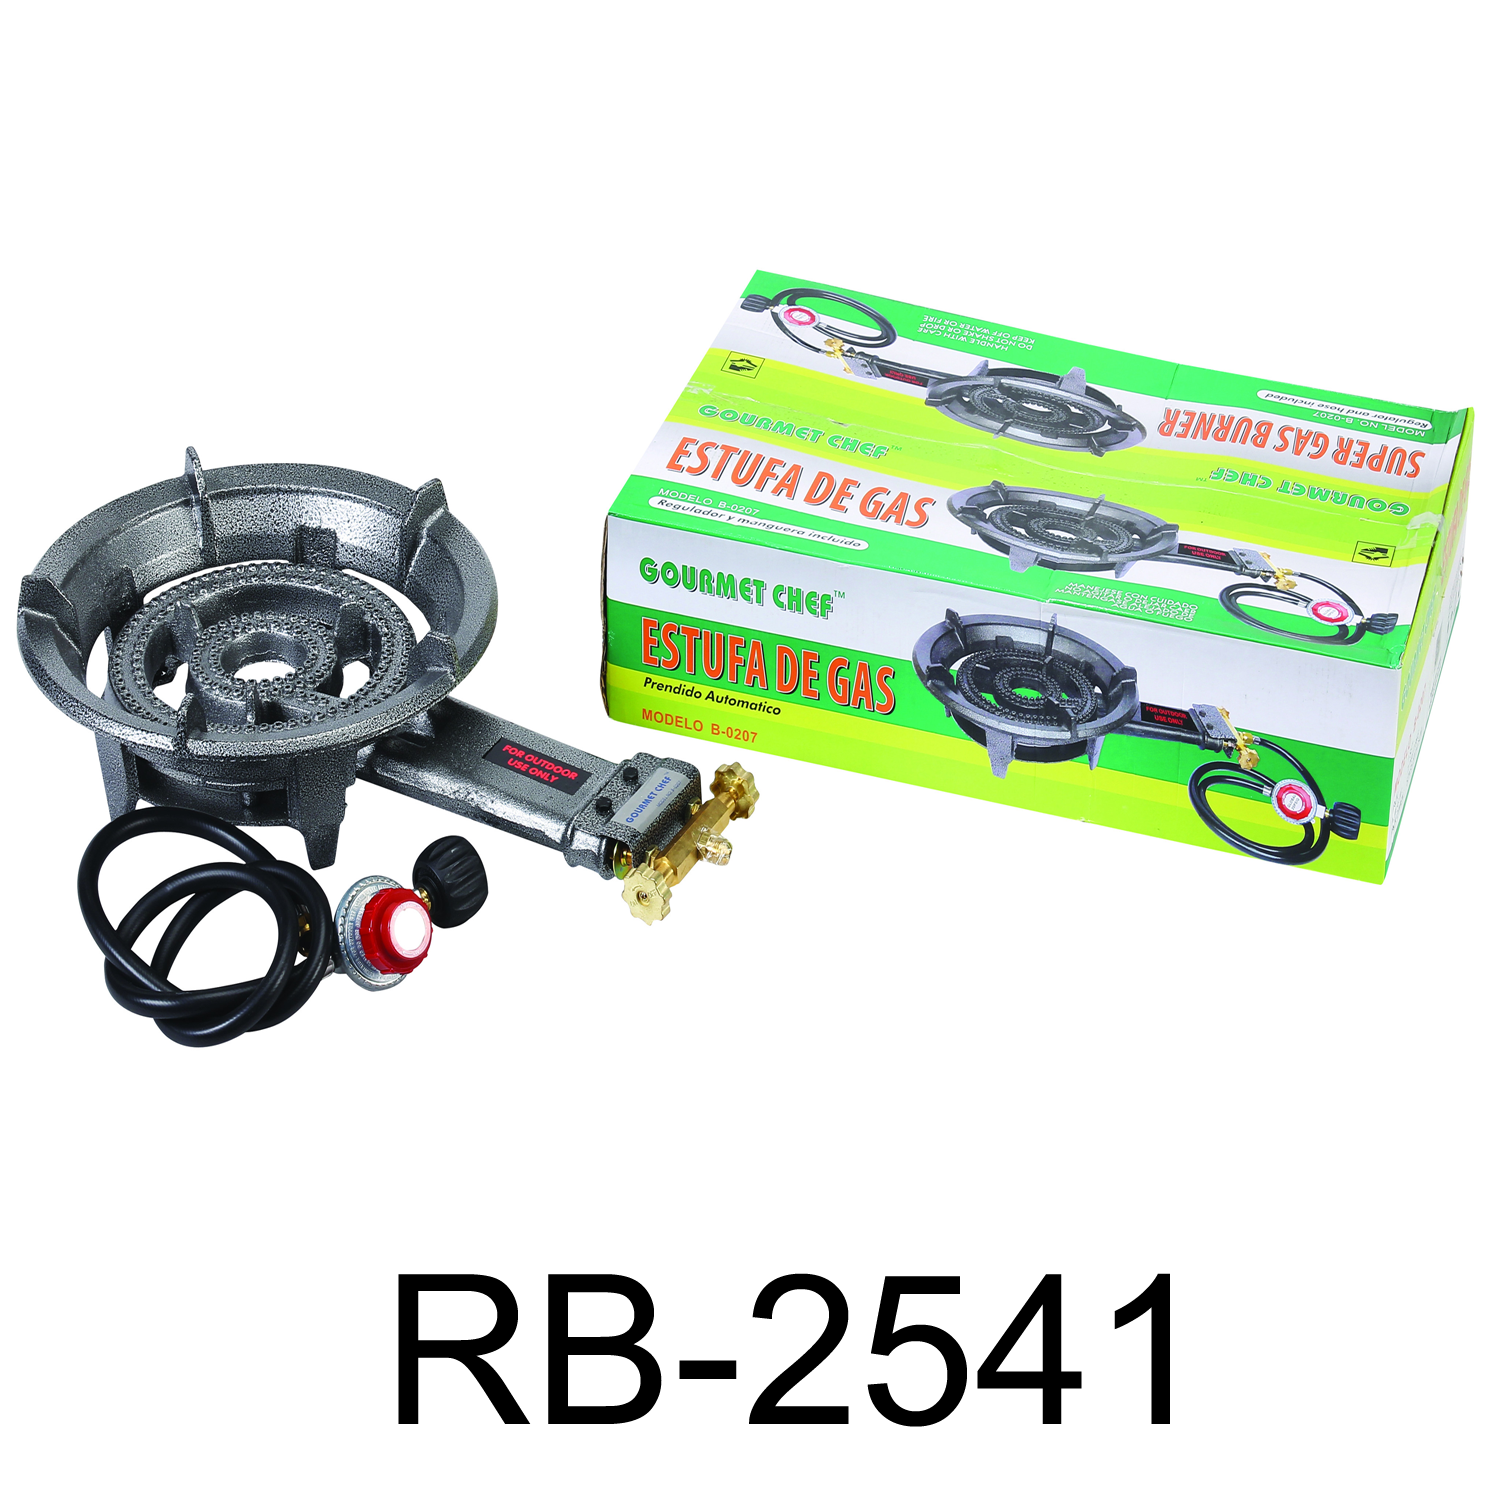 Round Cast Iron Burner with Auto Ignition - for Pickup Only (Excluding Wholesale Orders)